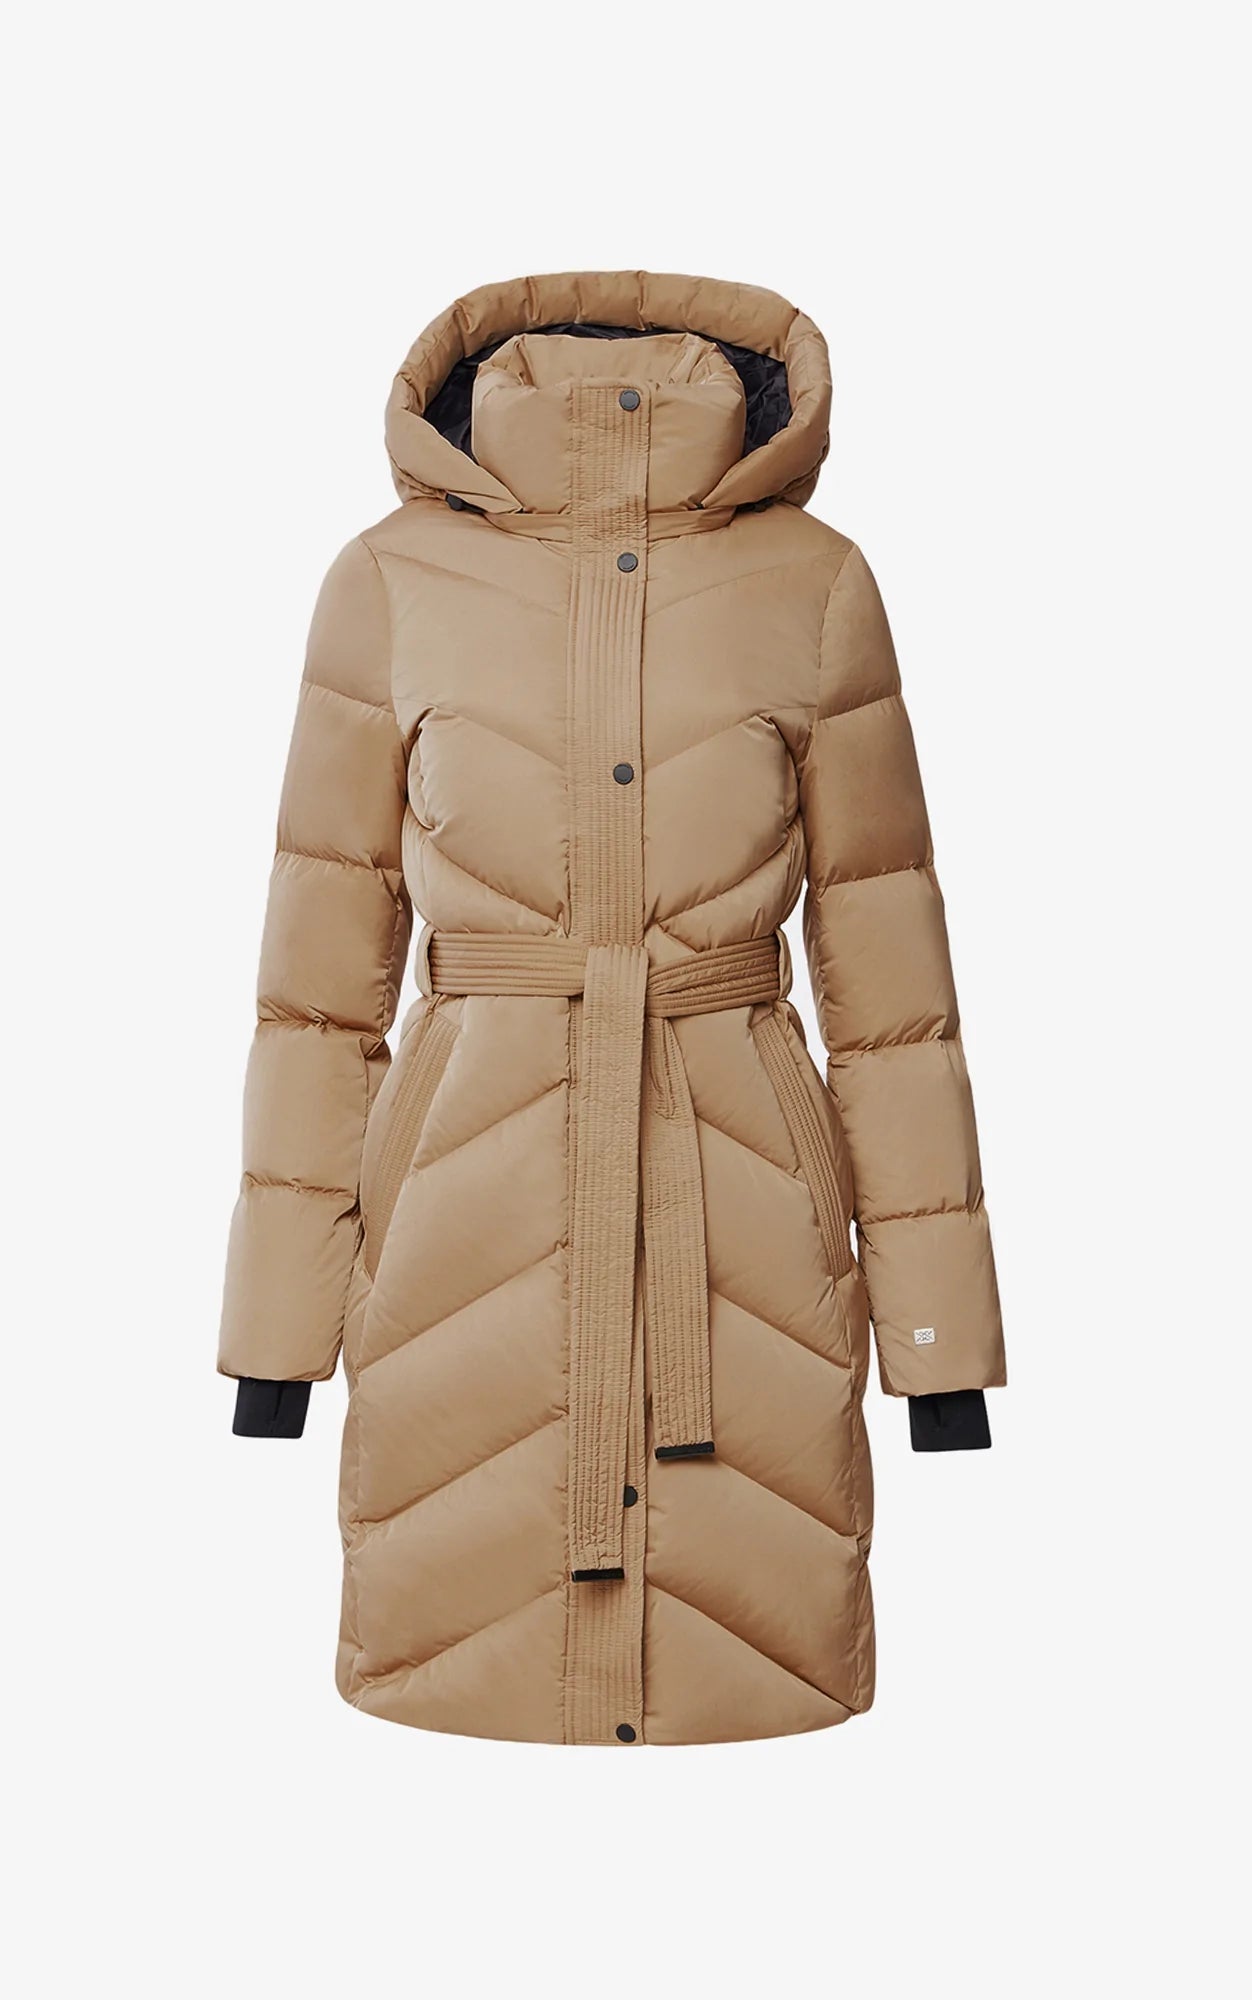 Soia & Kyo - Bryanna down coat in Toffee